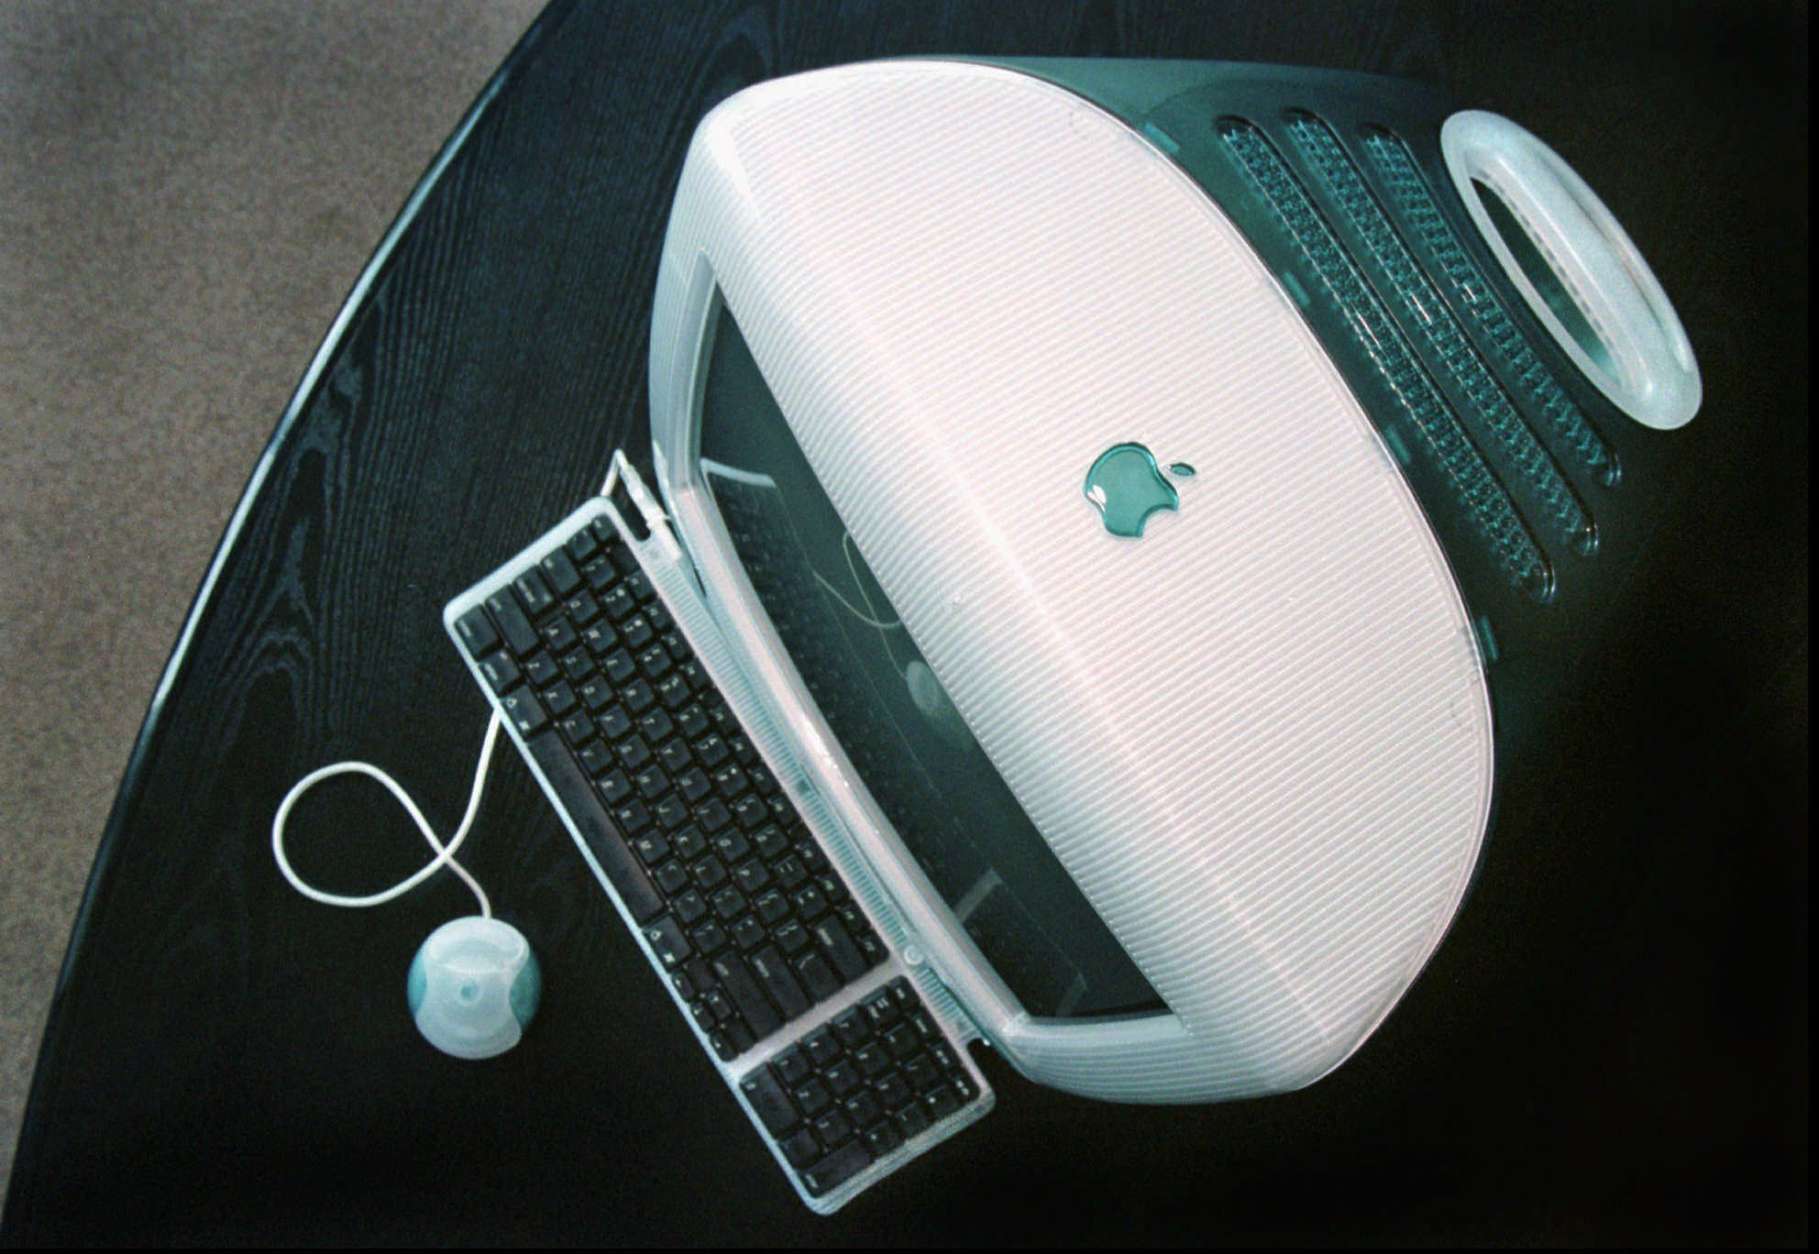 Apple's new iMAC computer is seen Wednesday, Aug. 13, 1998, at Apple headquarters in Cupertino, Calif. The latest Macintosh goes on sale Saturday for $1,299.00, amid high demand from loyal Mac users. Apple said it has received more than 150,000 advance orders the first week it began accepting requests. (AP Photo/Ben Margot)